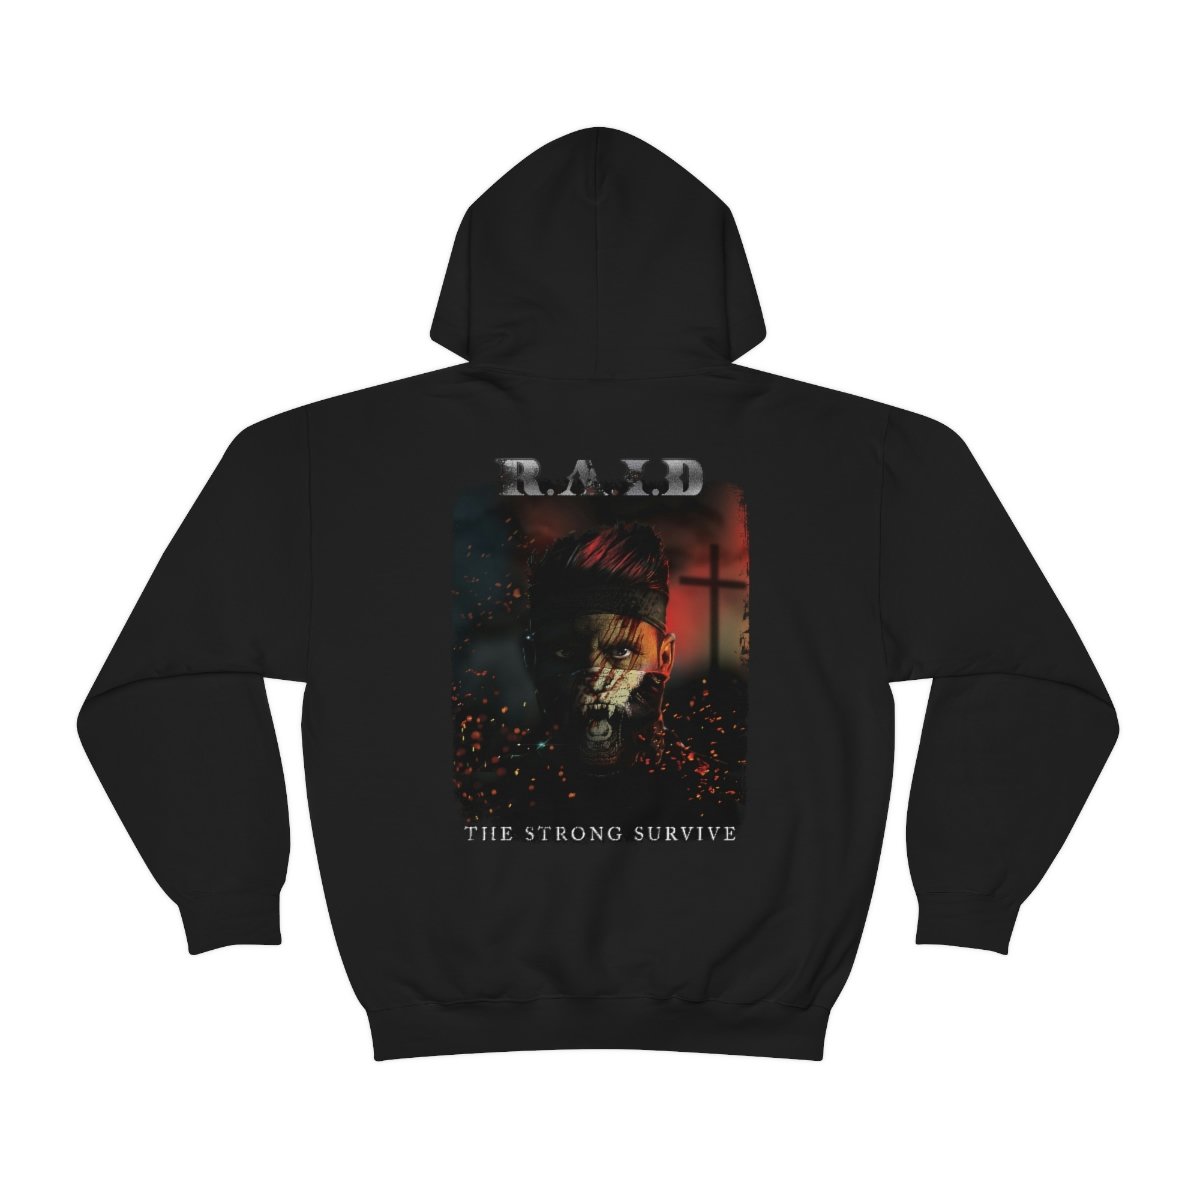 R.A.I.D – The Strong Survive Pullover Hooded Sweatshirt